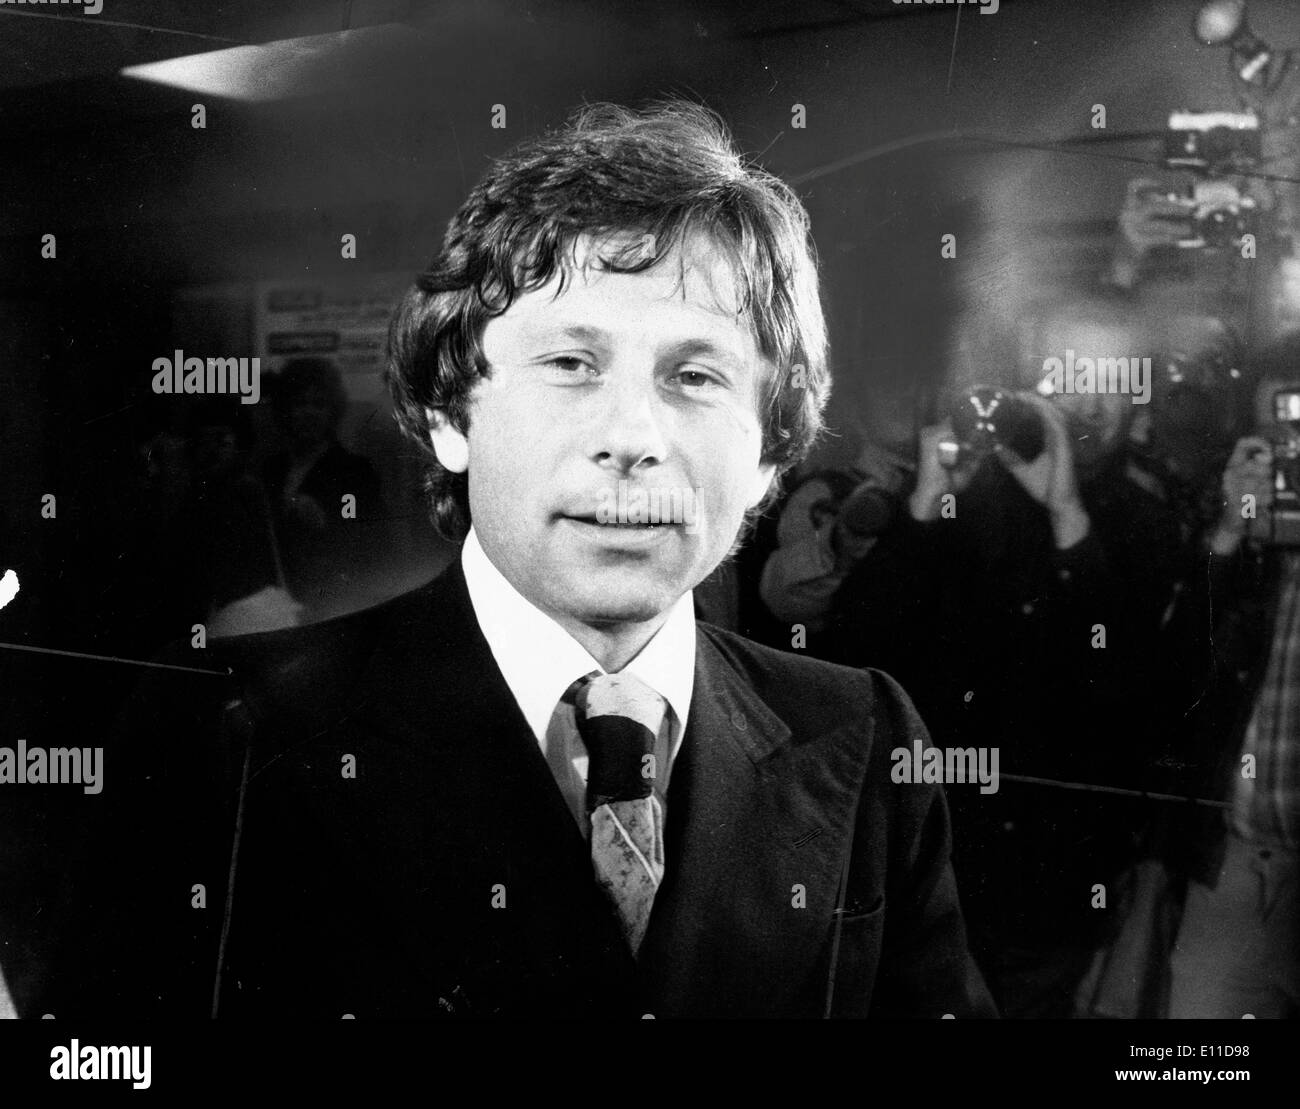 Apr 15, 1977; Paris, France; Film director and actor ROMAN POLANSKI b. 8/18/1933 was exiled from the United States after tryin Stock Photo